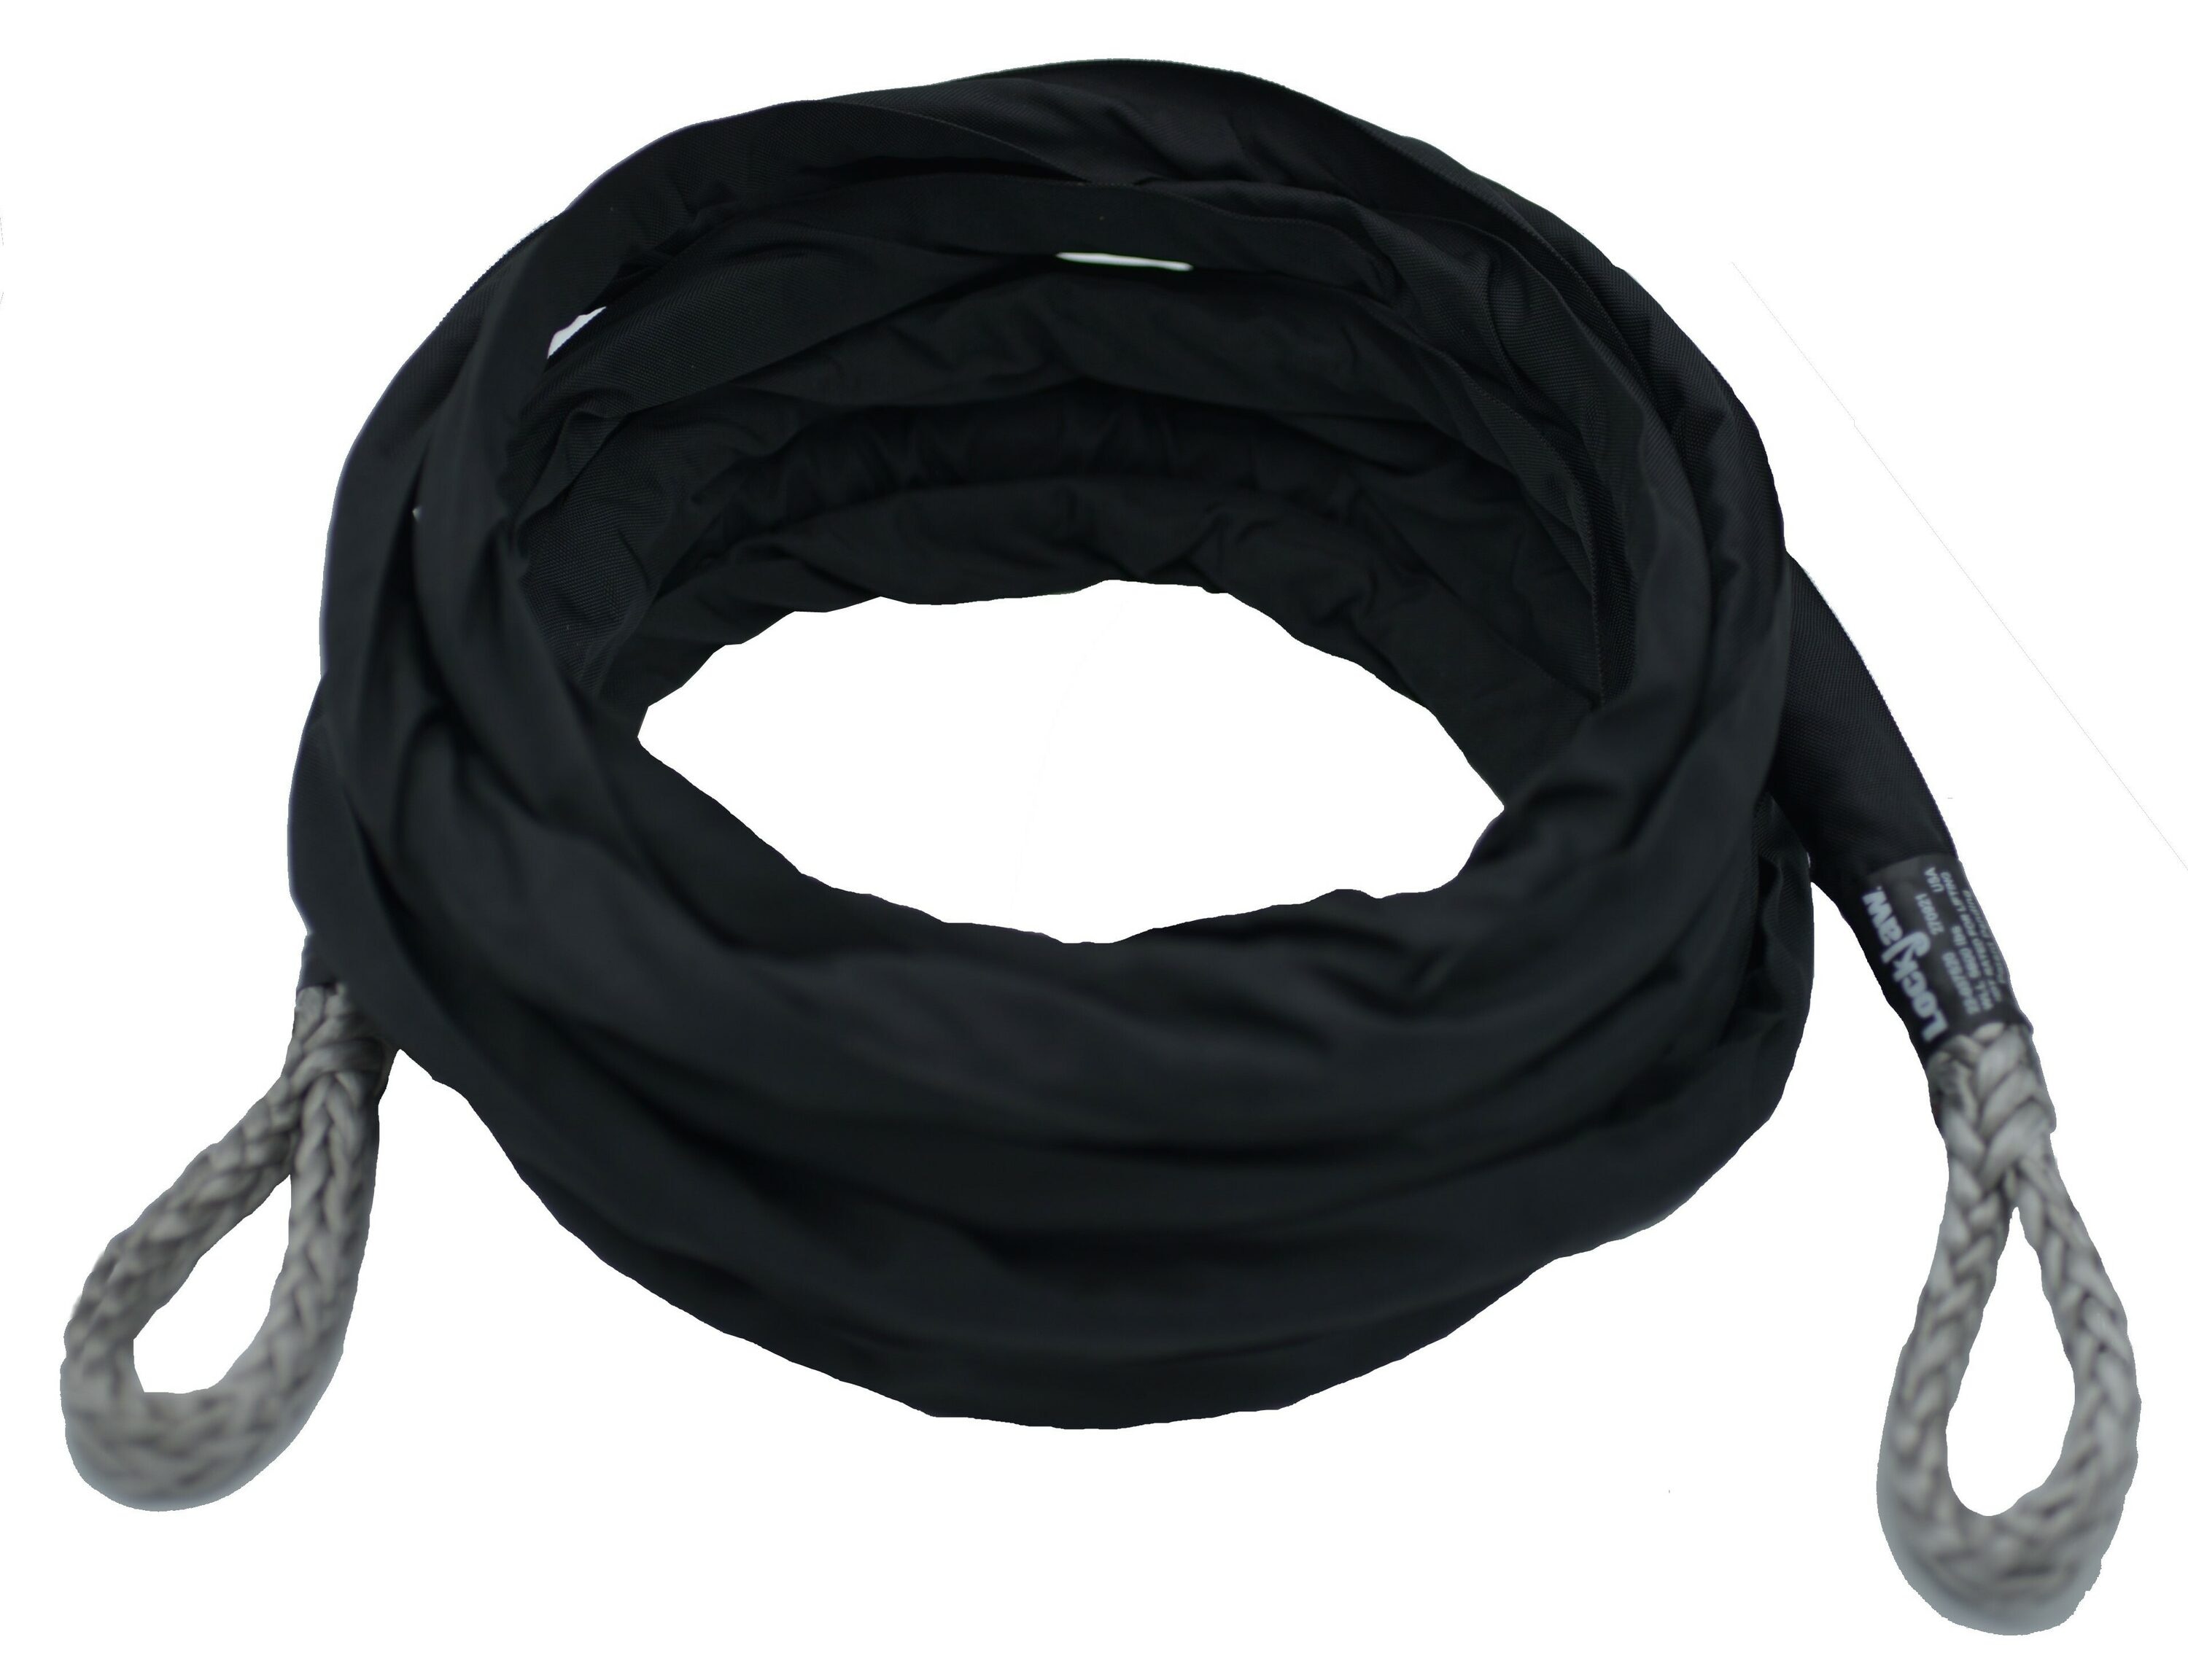 LockJaw Winch Rope 3/8-in 6,600 lb. with Chafe Sleeve - 10 ft